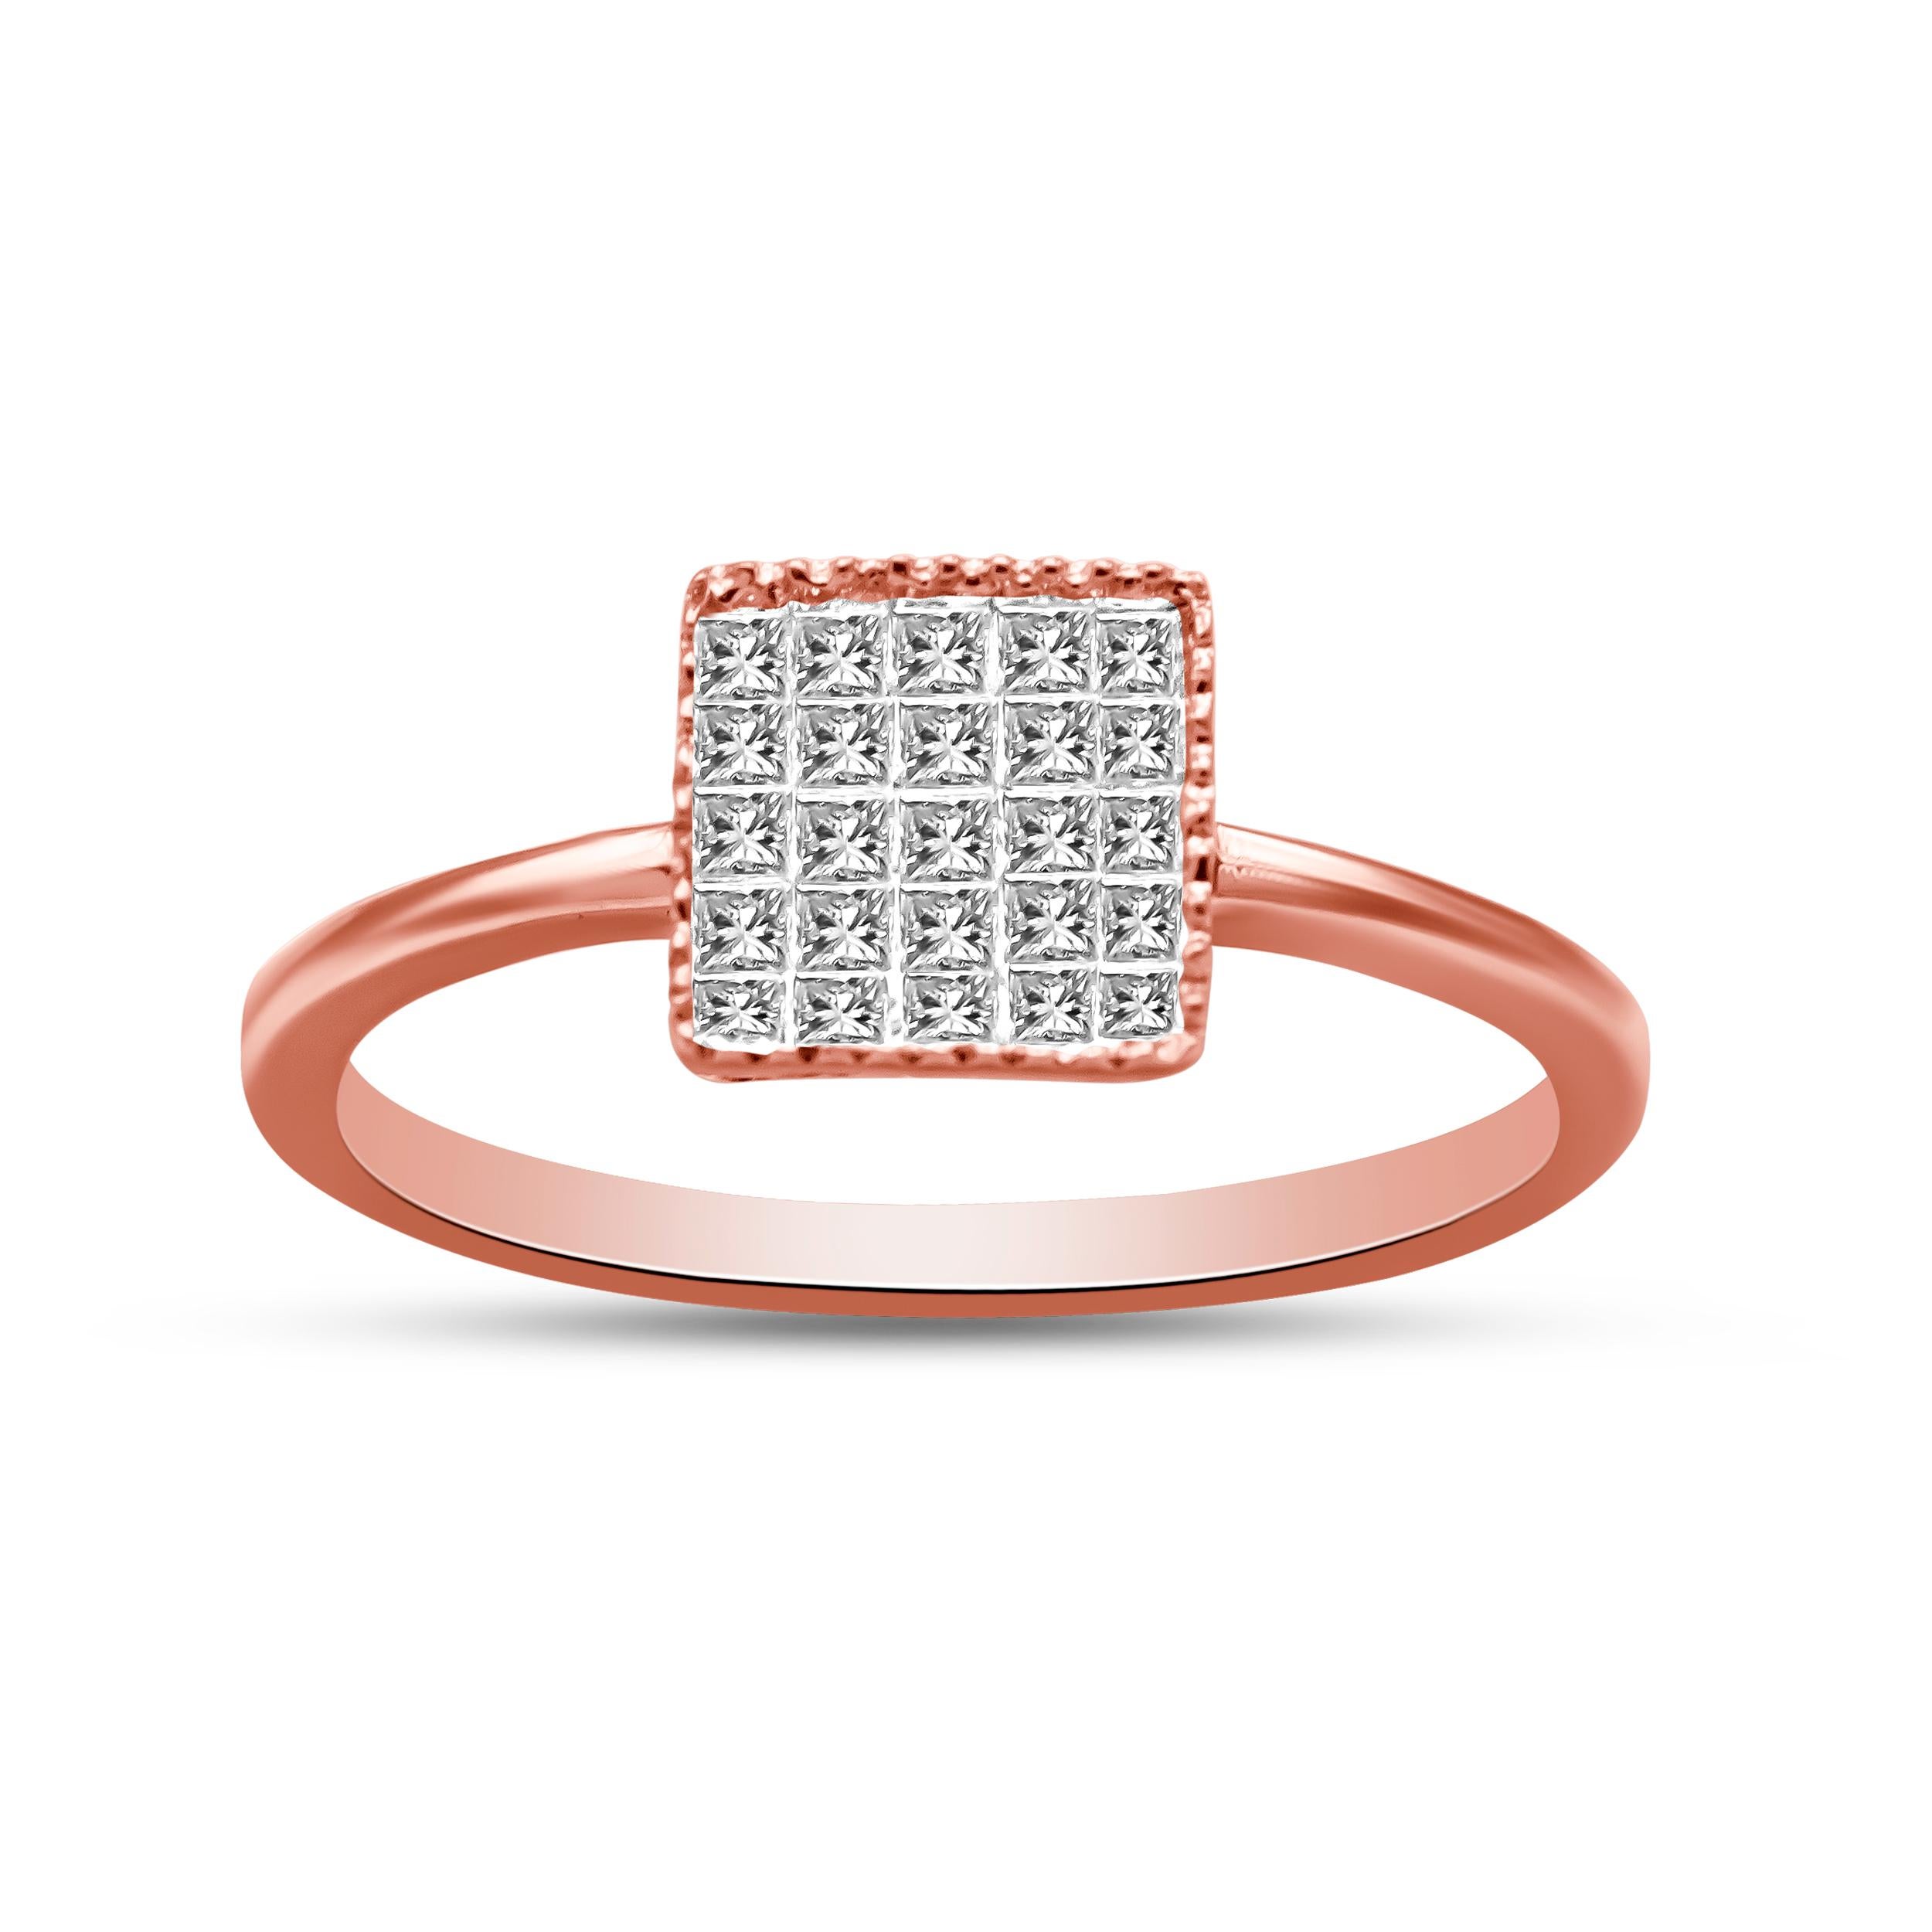 Add shimmer to any look with this eye-catching diamond ring. Fashioned in rich 10K rose gold, this striking style showcases a square-shaped composite of petite princess-cut diamonds. The diamonds are invisibly set to minimize metal and maximize